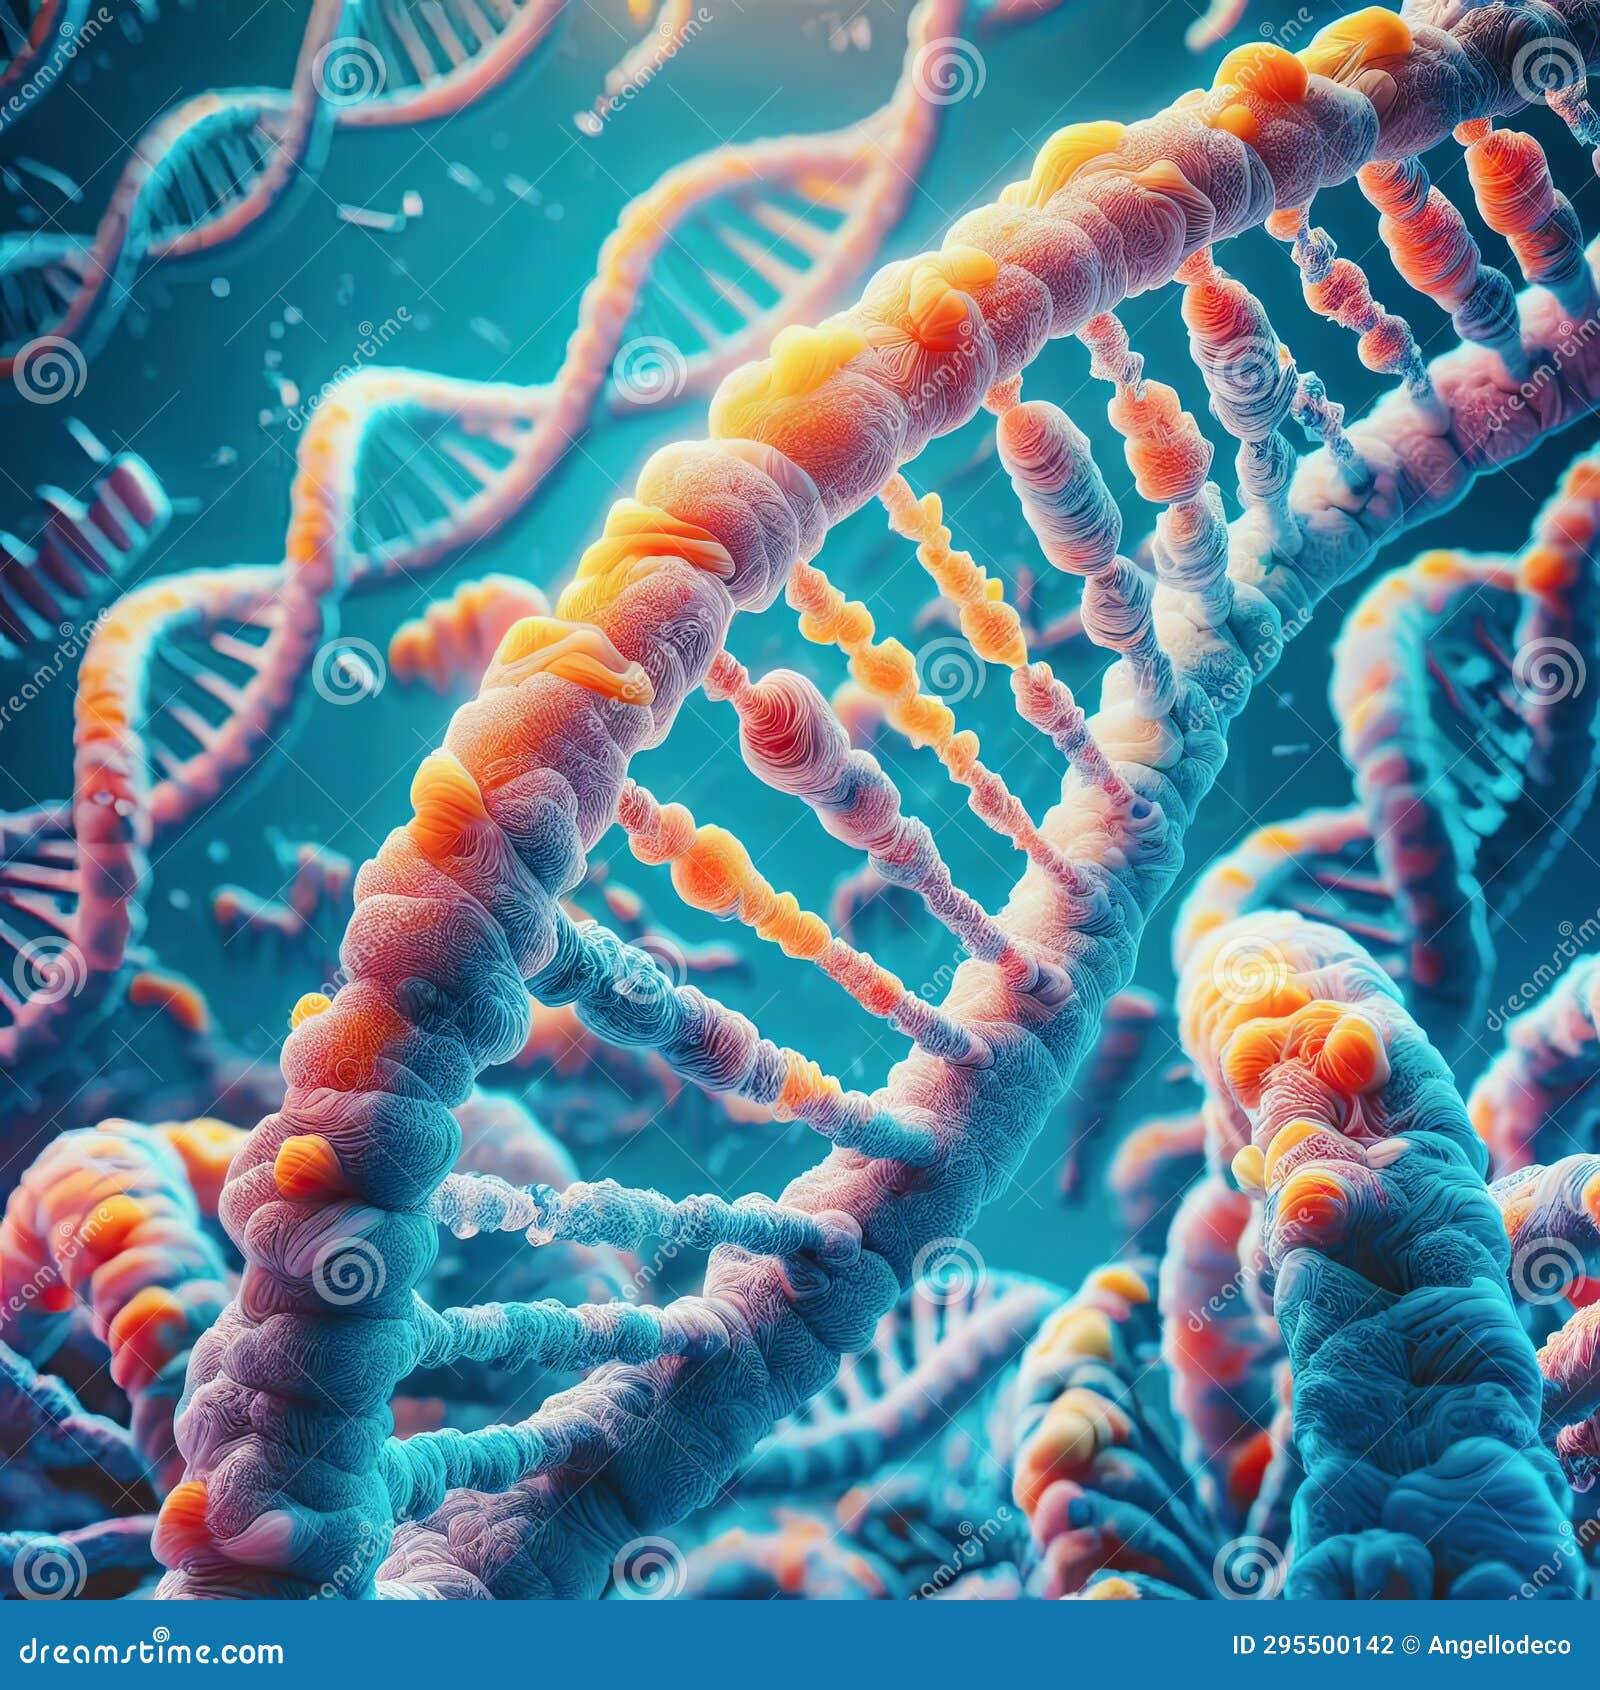 Illustration of DNA Double Helix Seen Under a Electron Microscope ...